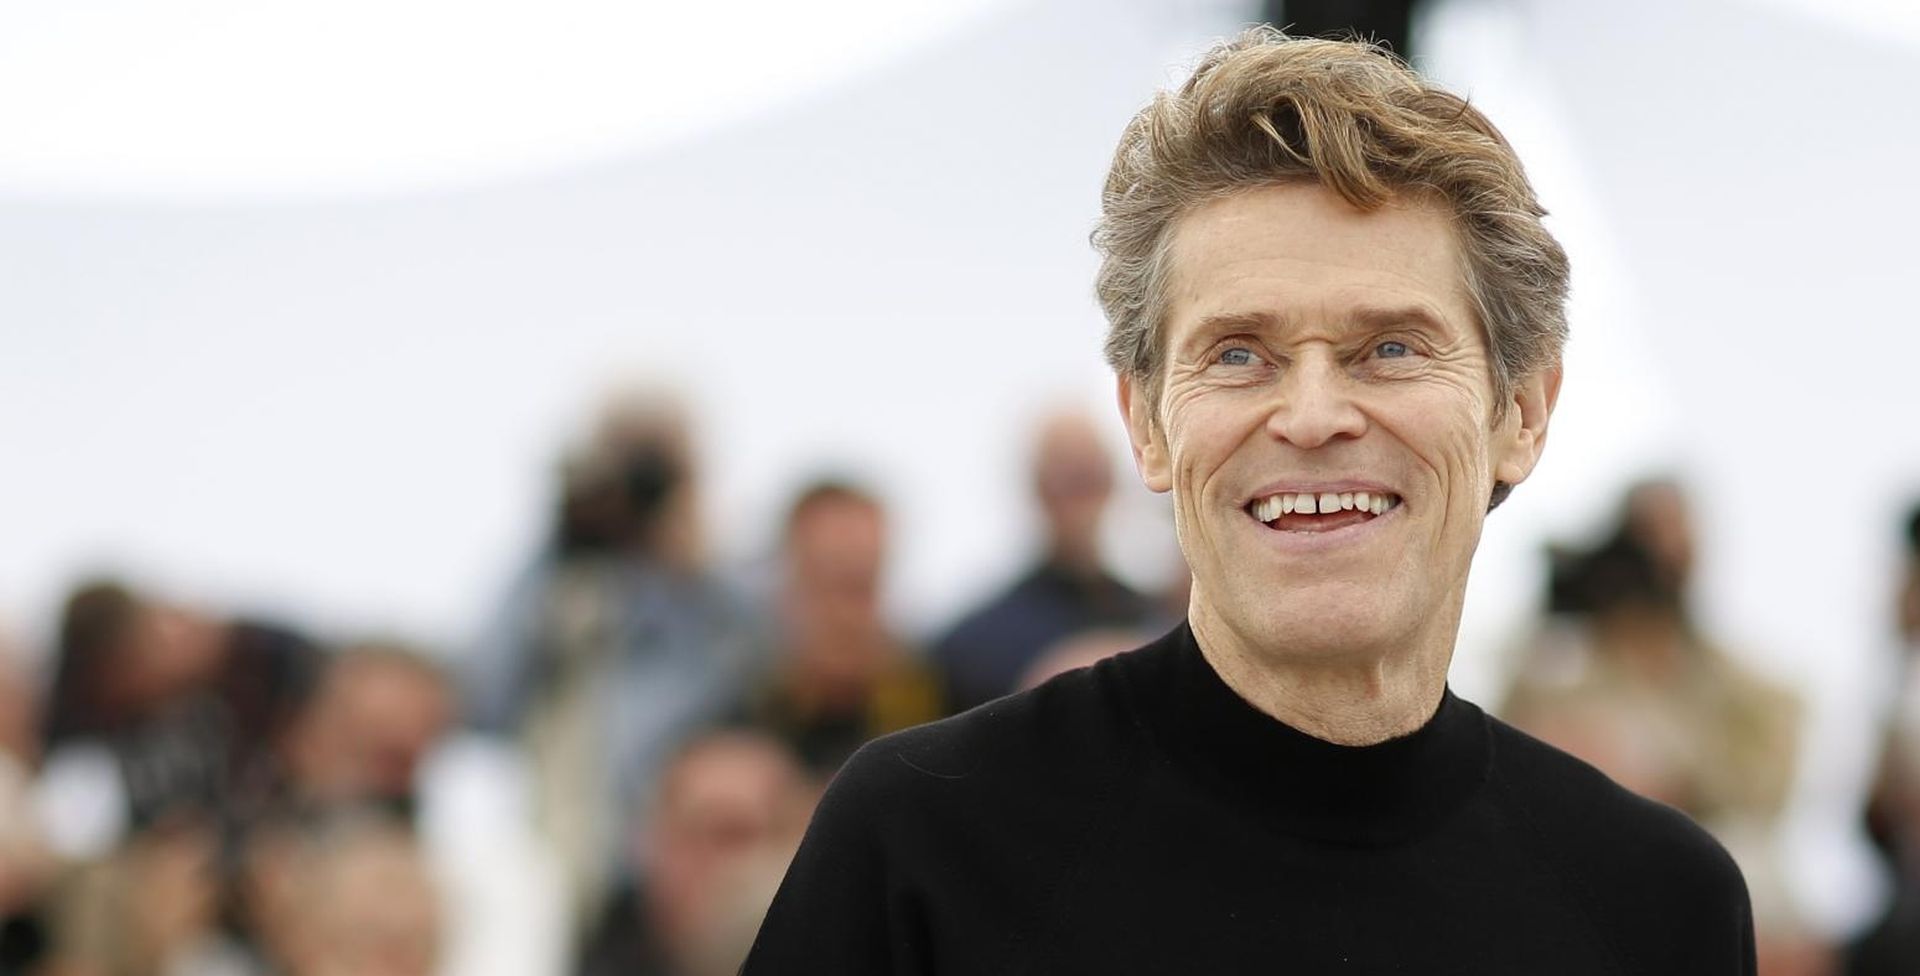 72nd Cannes Film Festival - Photocall for the film "Tommaso" presented as part of special screenings 72nd Cannes Film Festival - Photocall for the film "Tommaso" presented as part of special screenings - Cannes, France, May 20, 2019. Cast member Willem Dafoe poses. REUTERS/Stephane Mahe STEPHANE MAHE